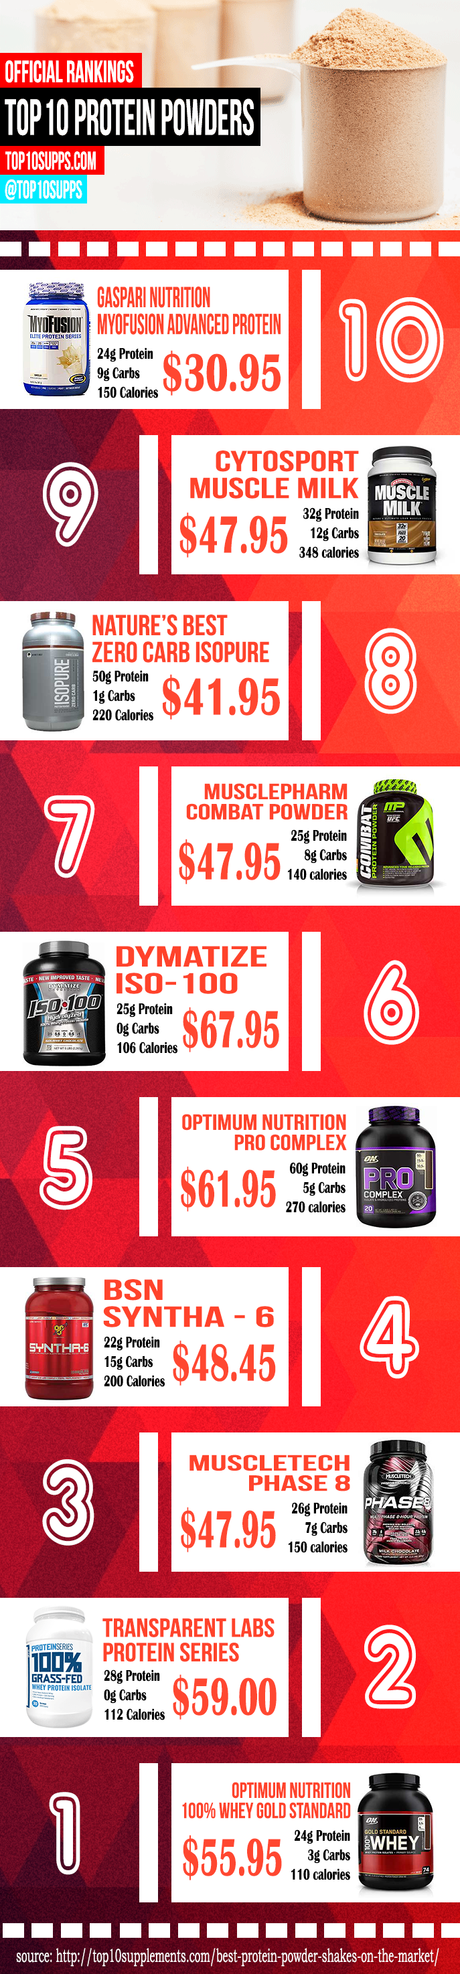 Top 10 Protein Powders Infographic